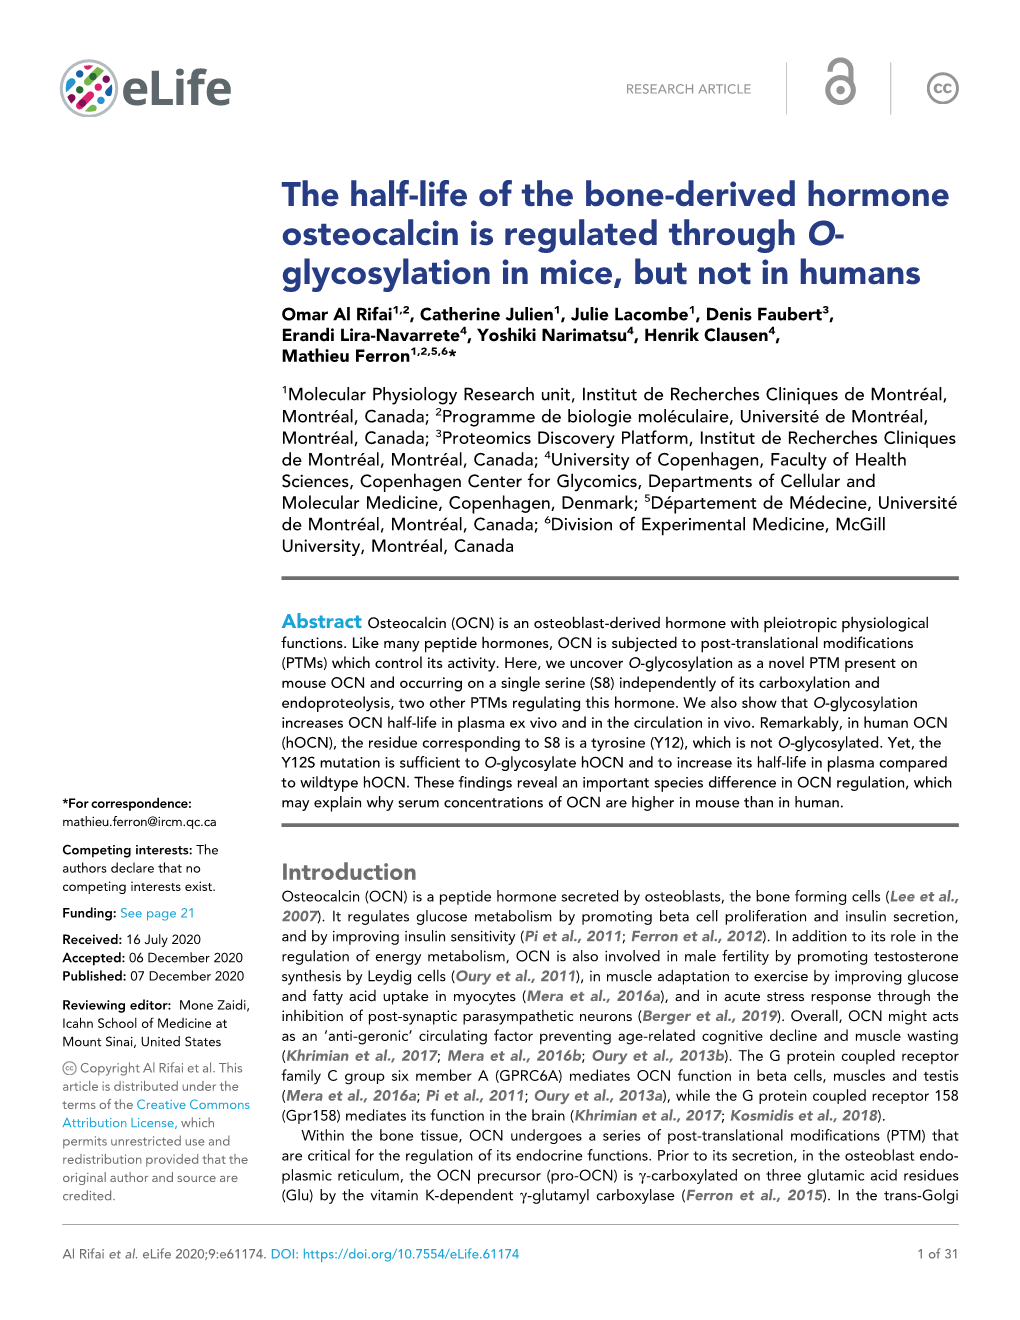 The Half-Life of the Bone-Derived Hormone Osteocalcin Is Regulated